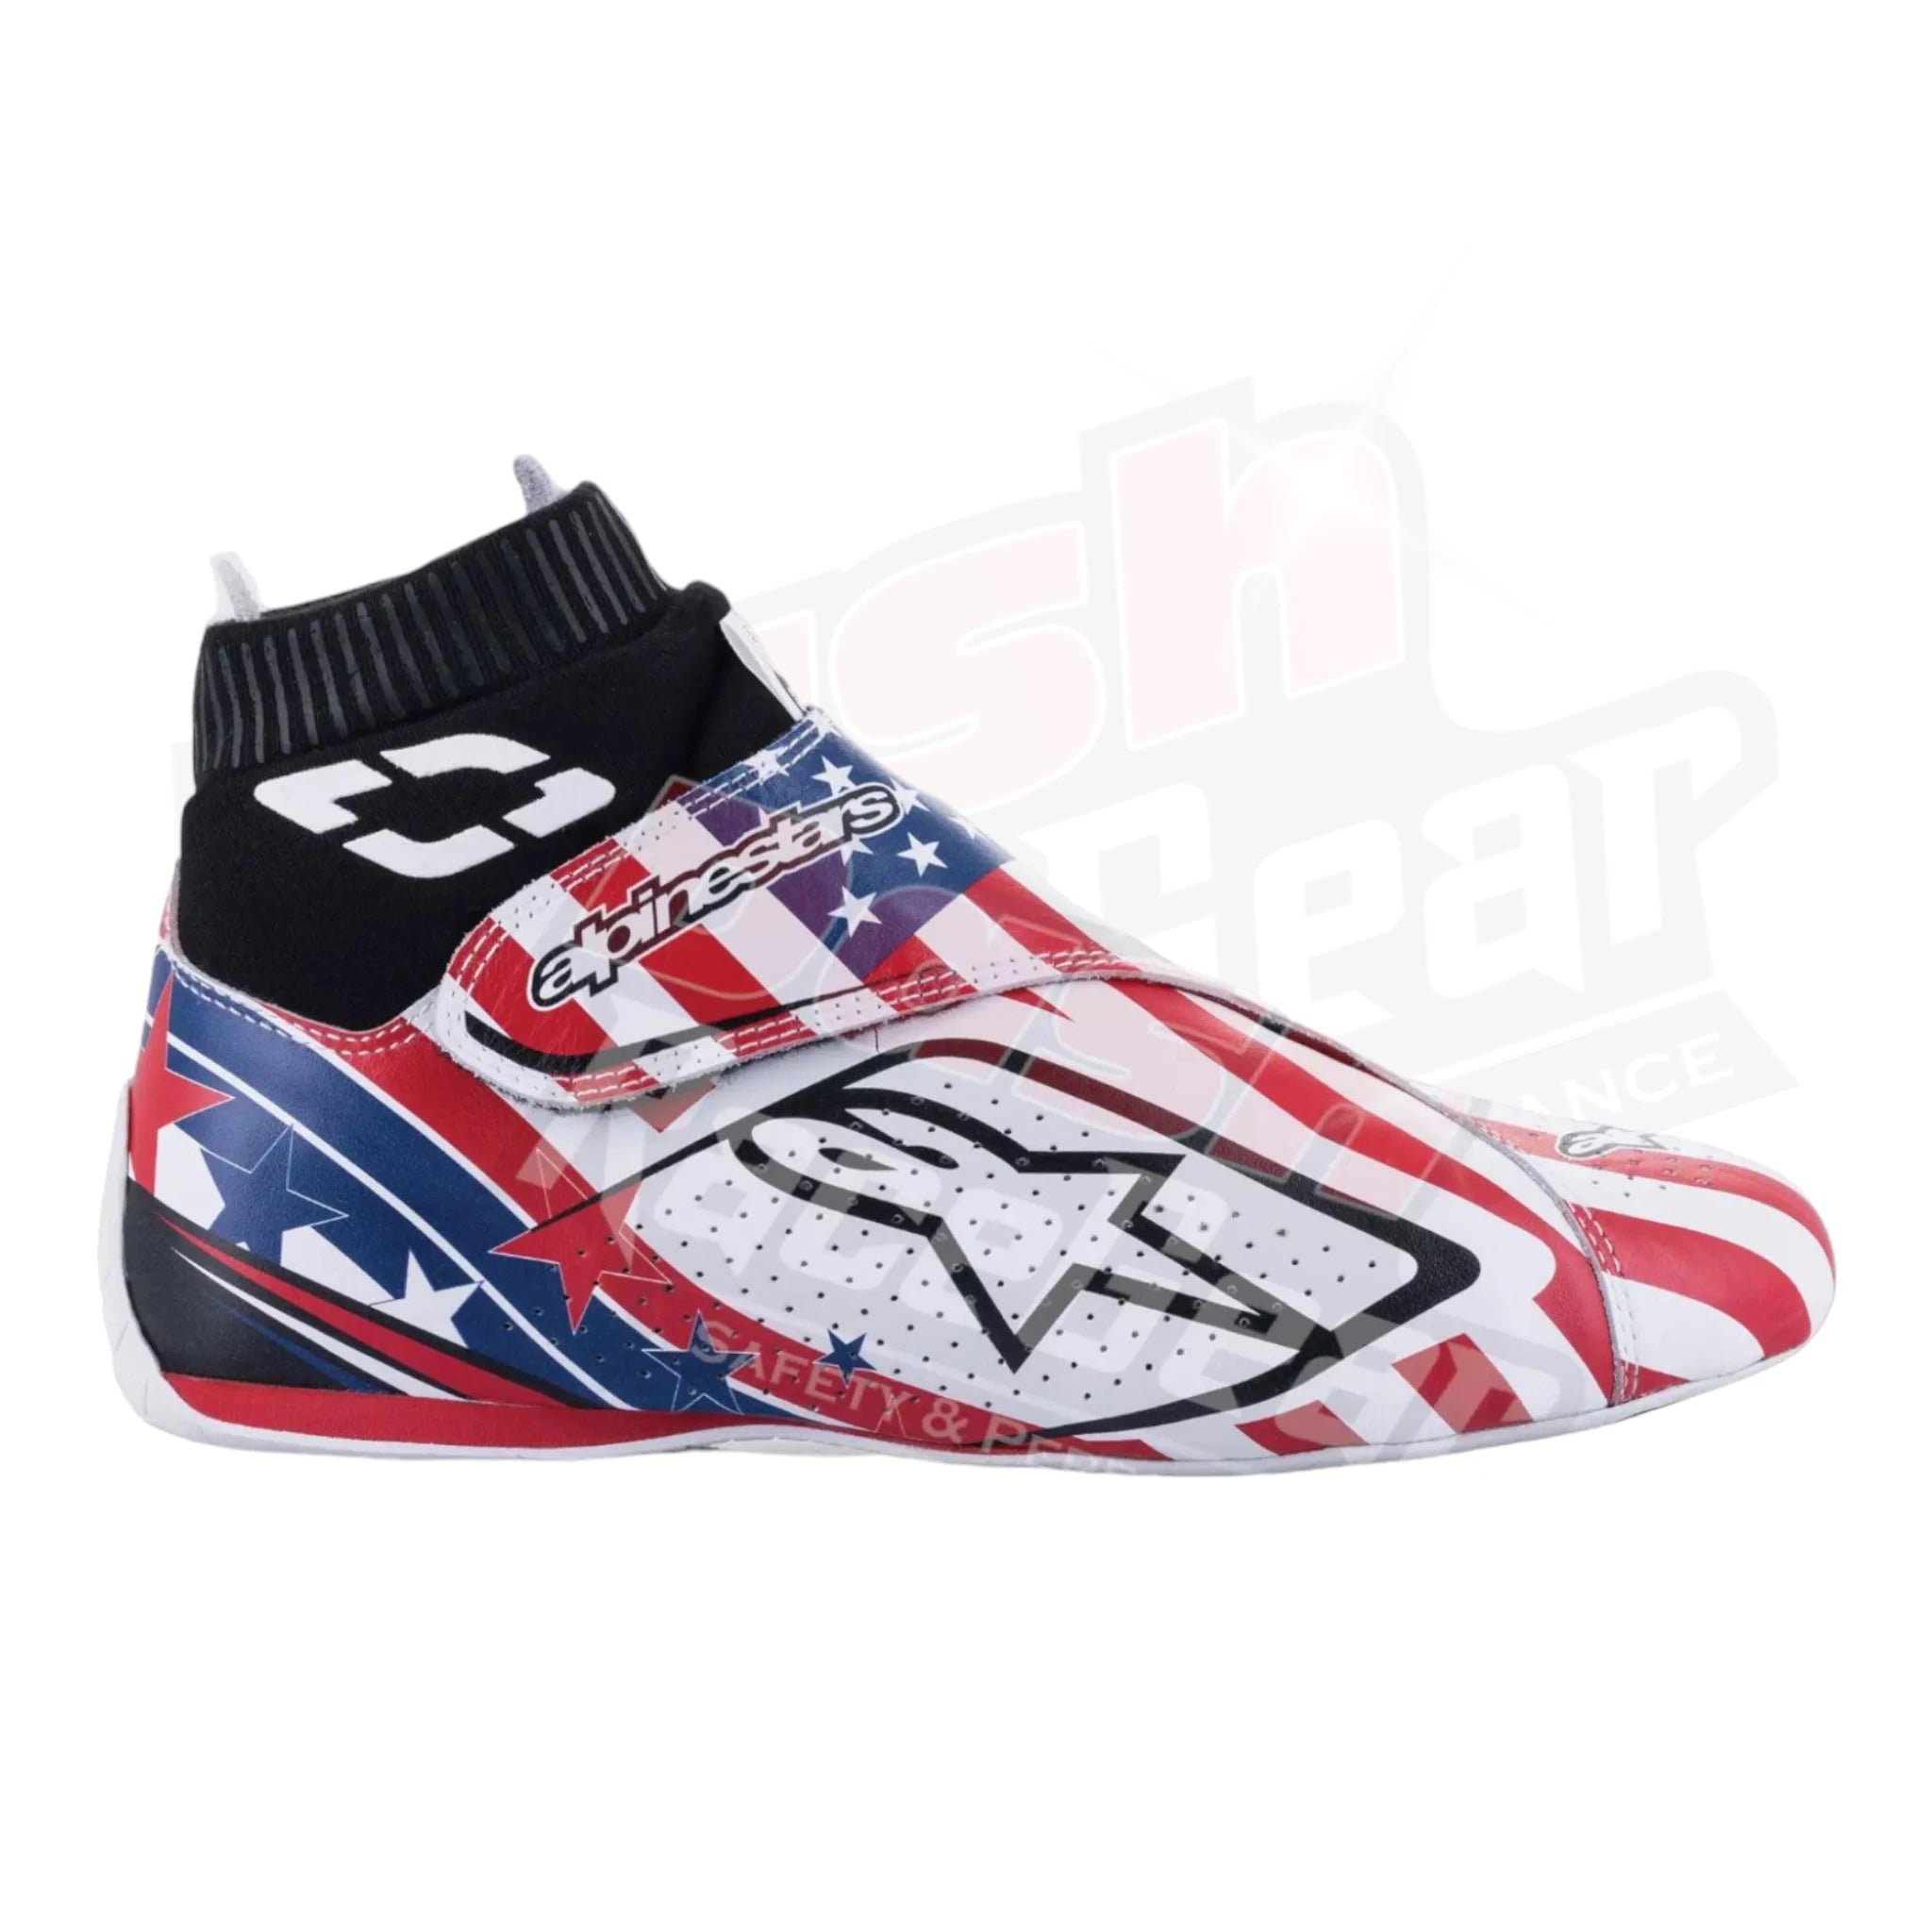 Special boots for Kevin Magnussen Haas F1 Team | United States GP